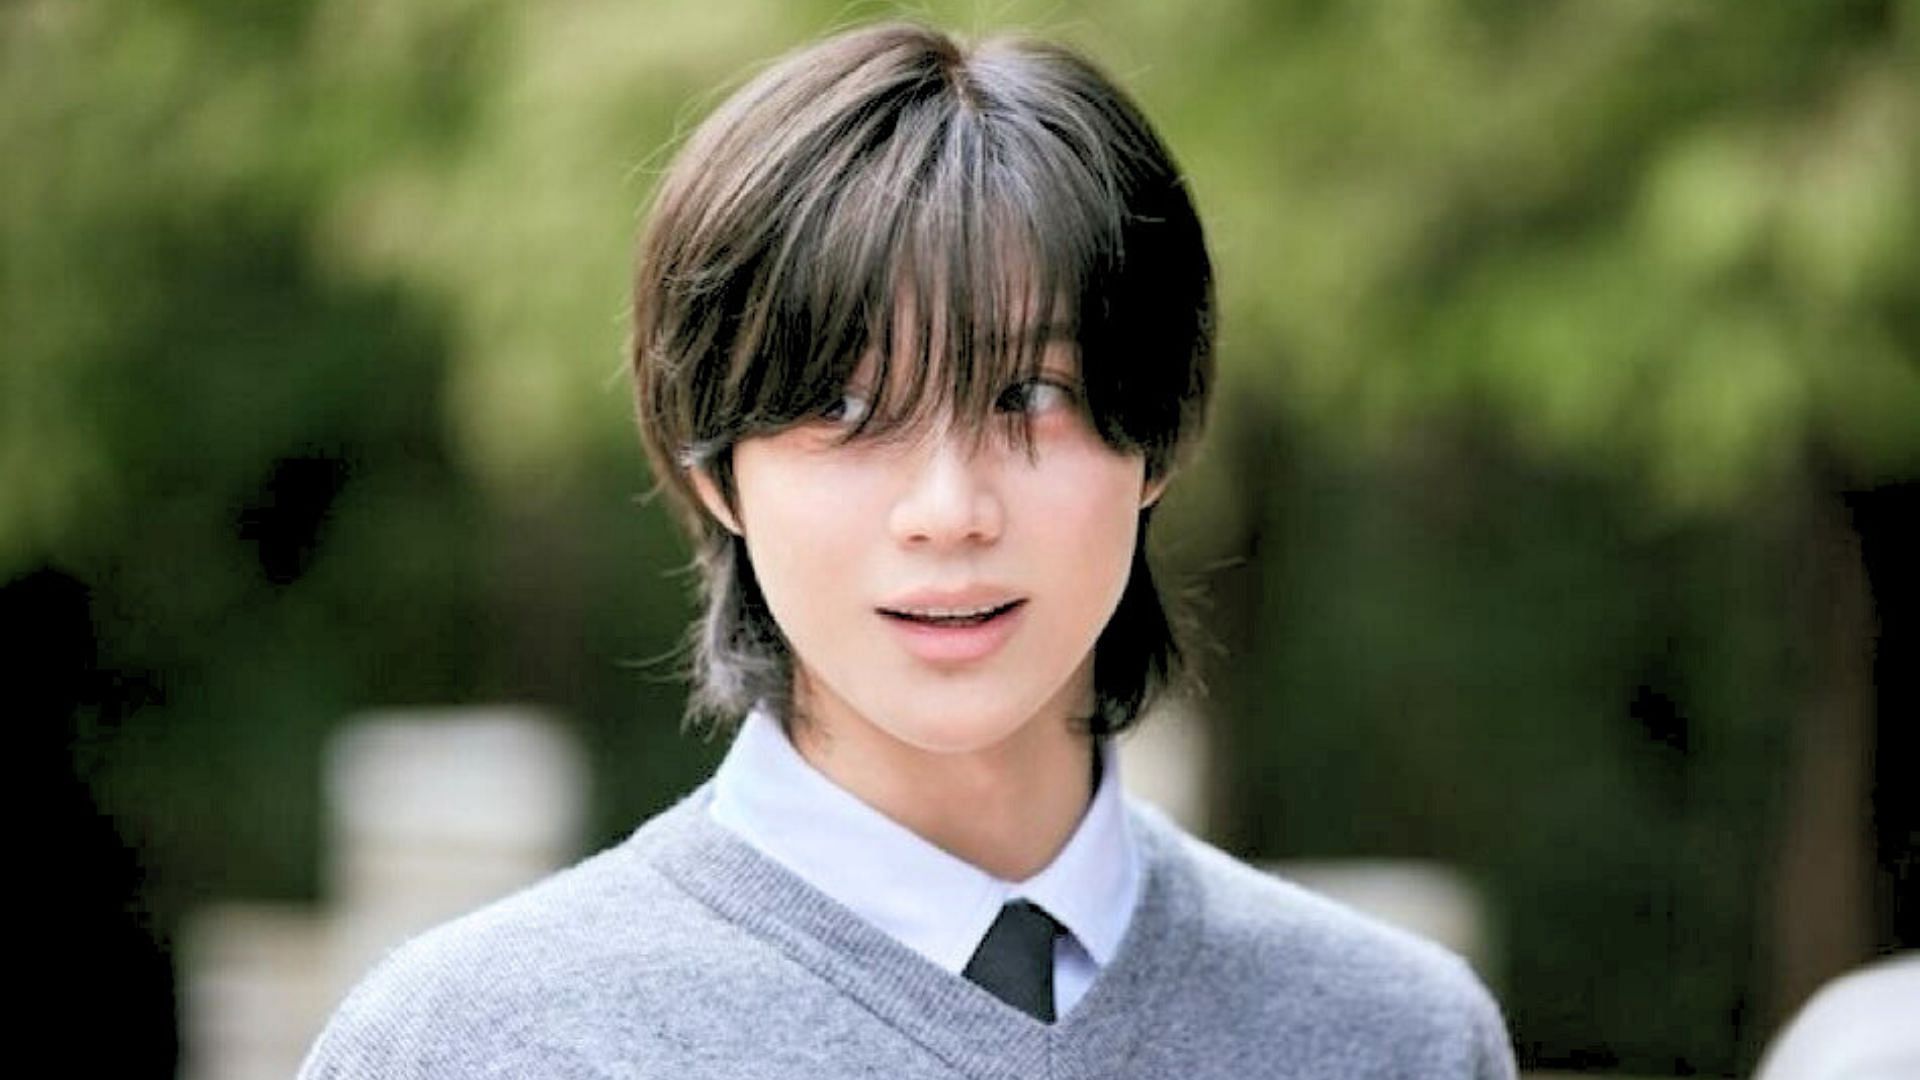 Taemin to depart from SM Entertainment (Image via Instagram/xoalsox)